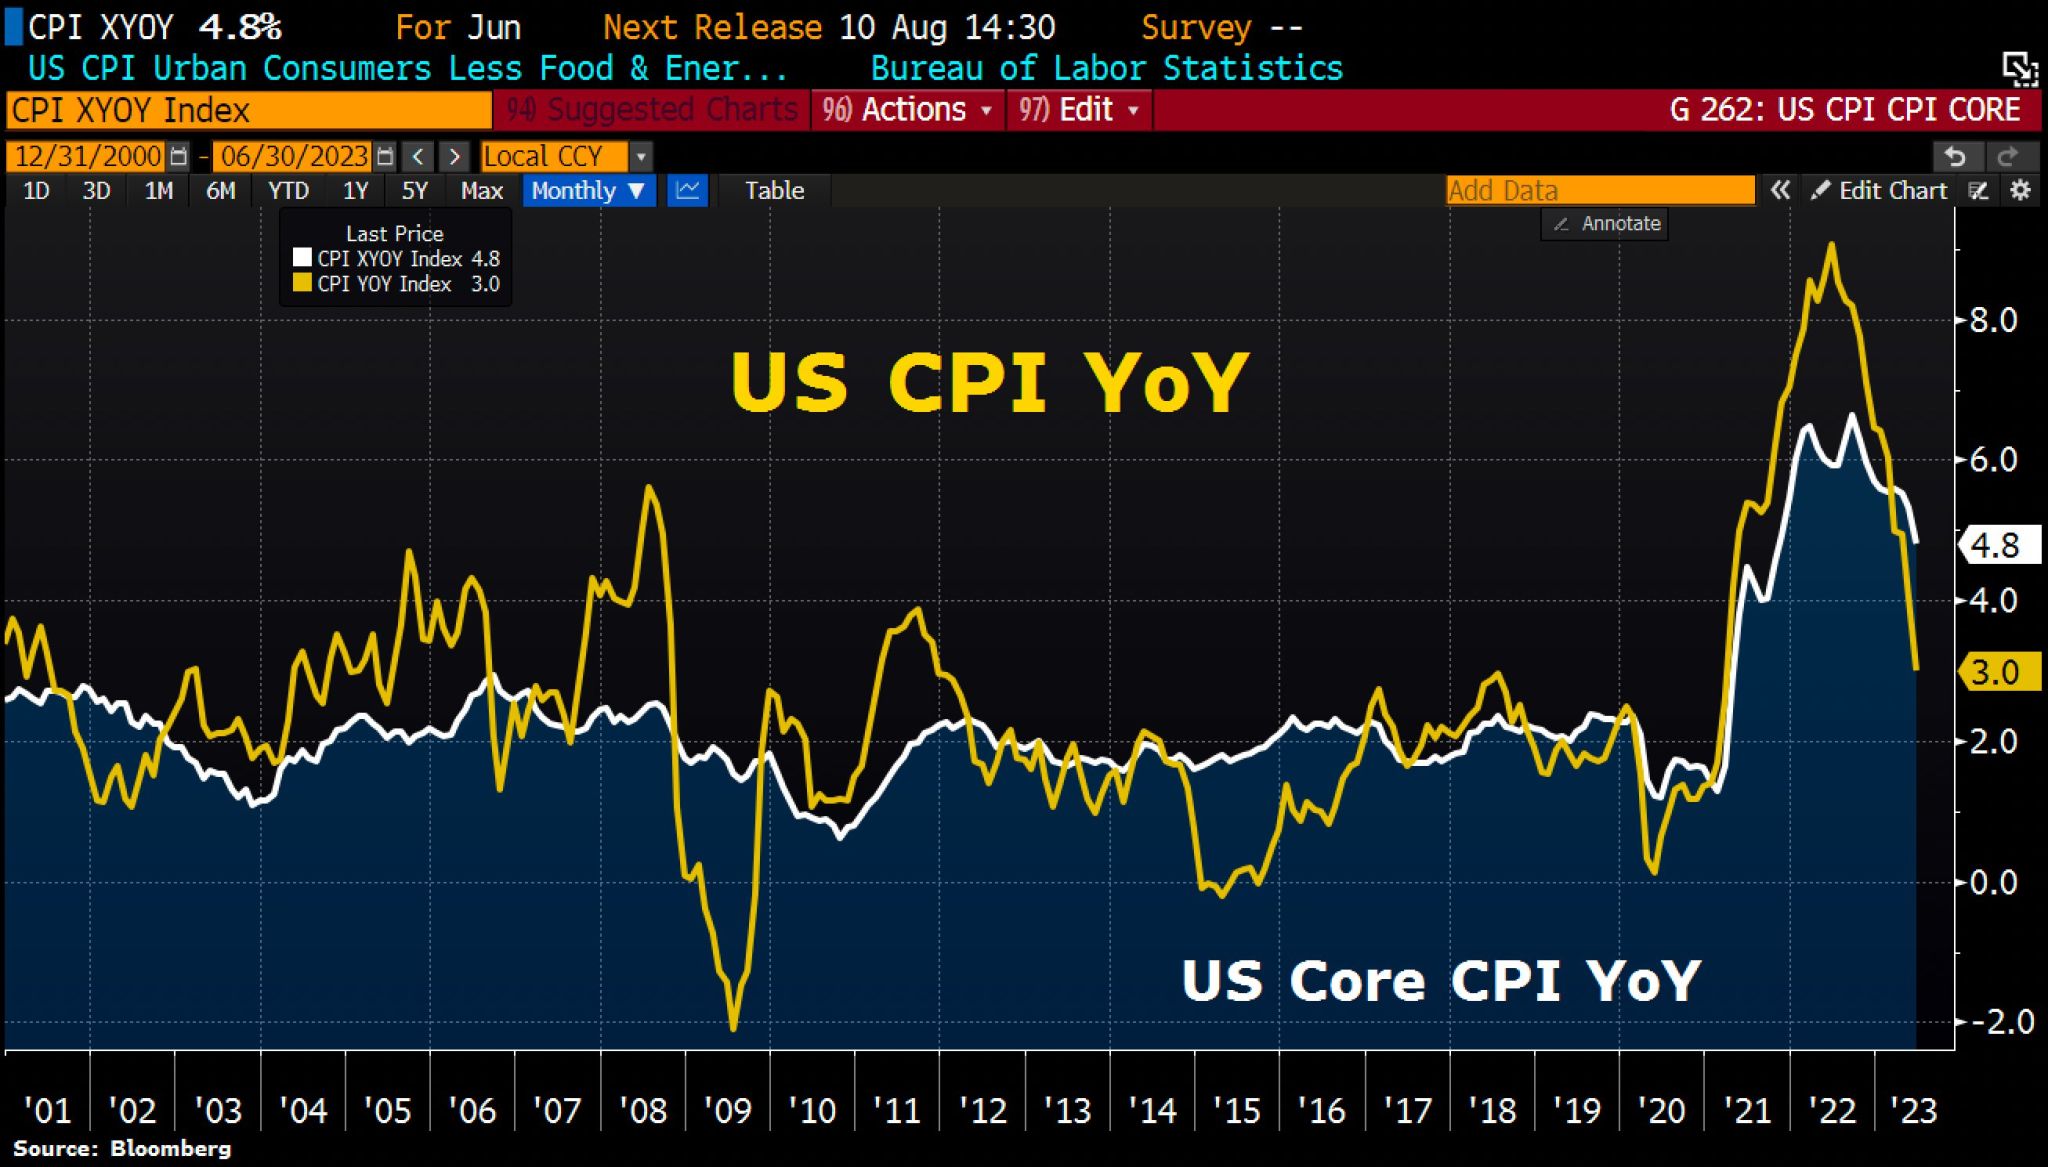 US inflation eased further in June w/core & headline coming in each at 0.2% MoM (v.s 0.3% expected).